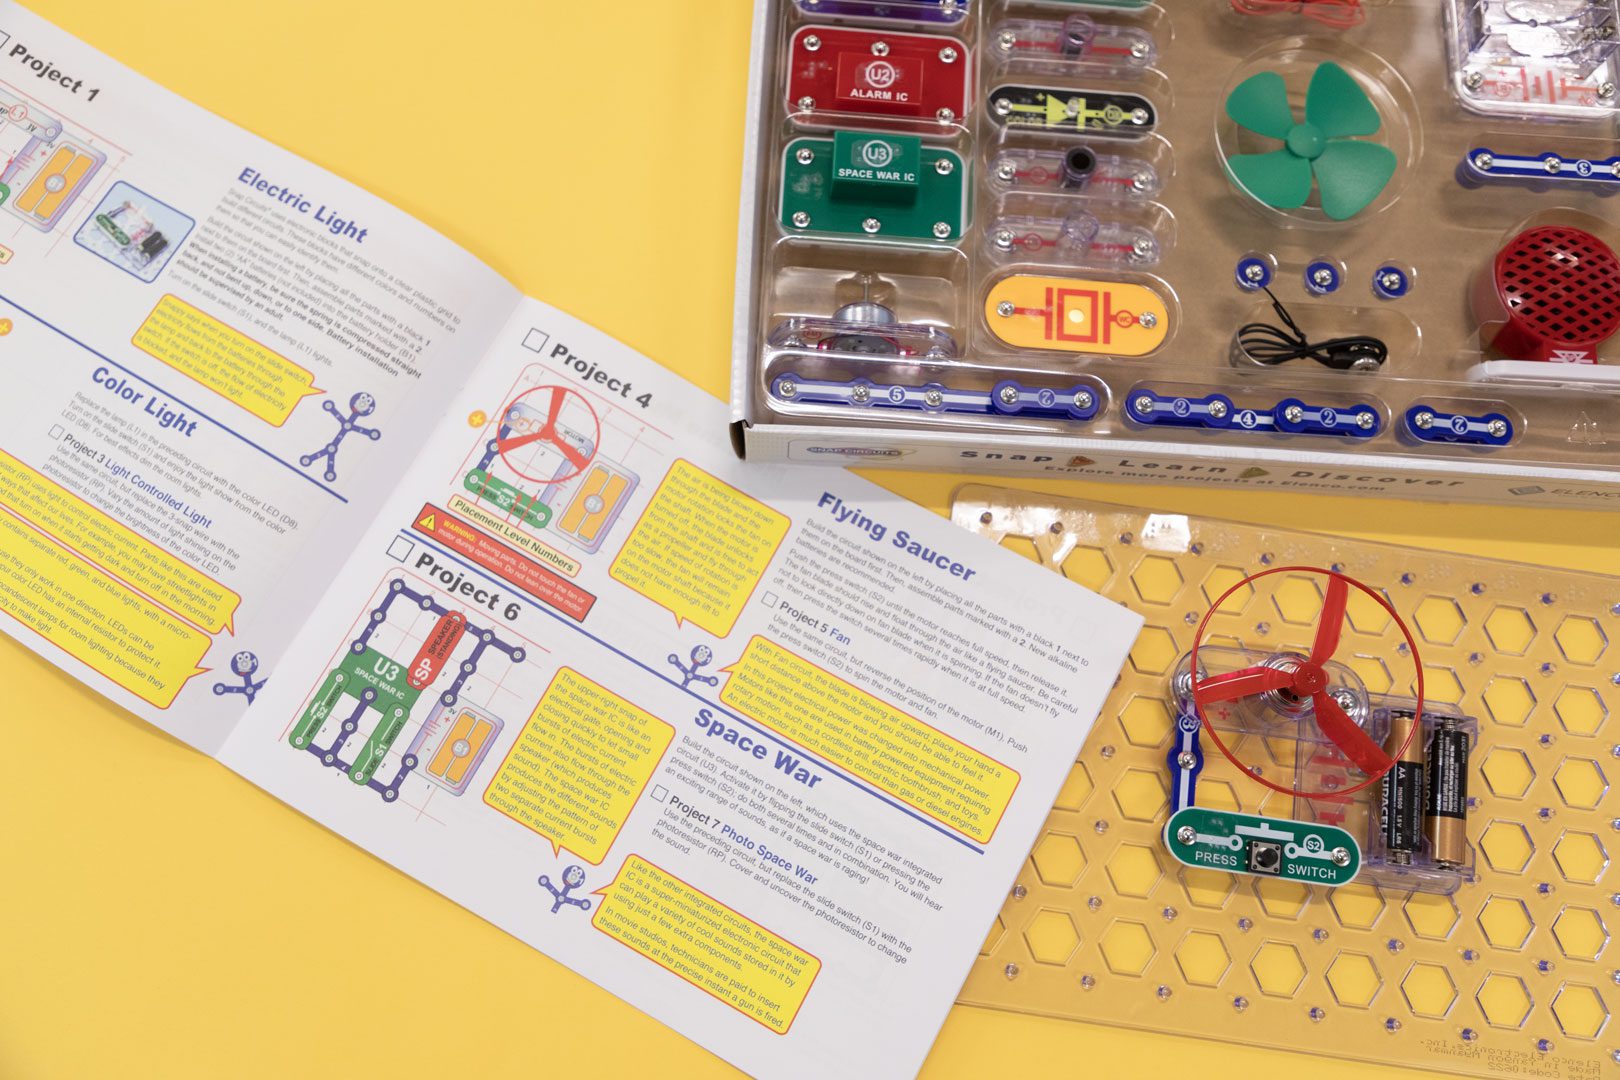 Snap Circuits Jr. Select SC-130 Electronics Exploration Kit, Over 130  Projects, Full Color Project Manual, 30+ Parts